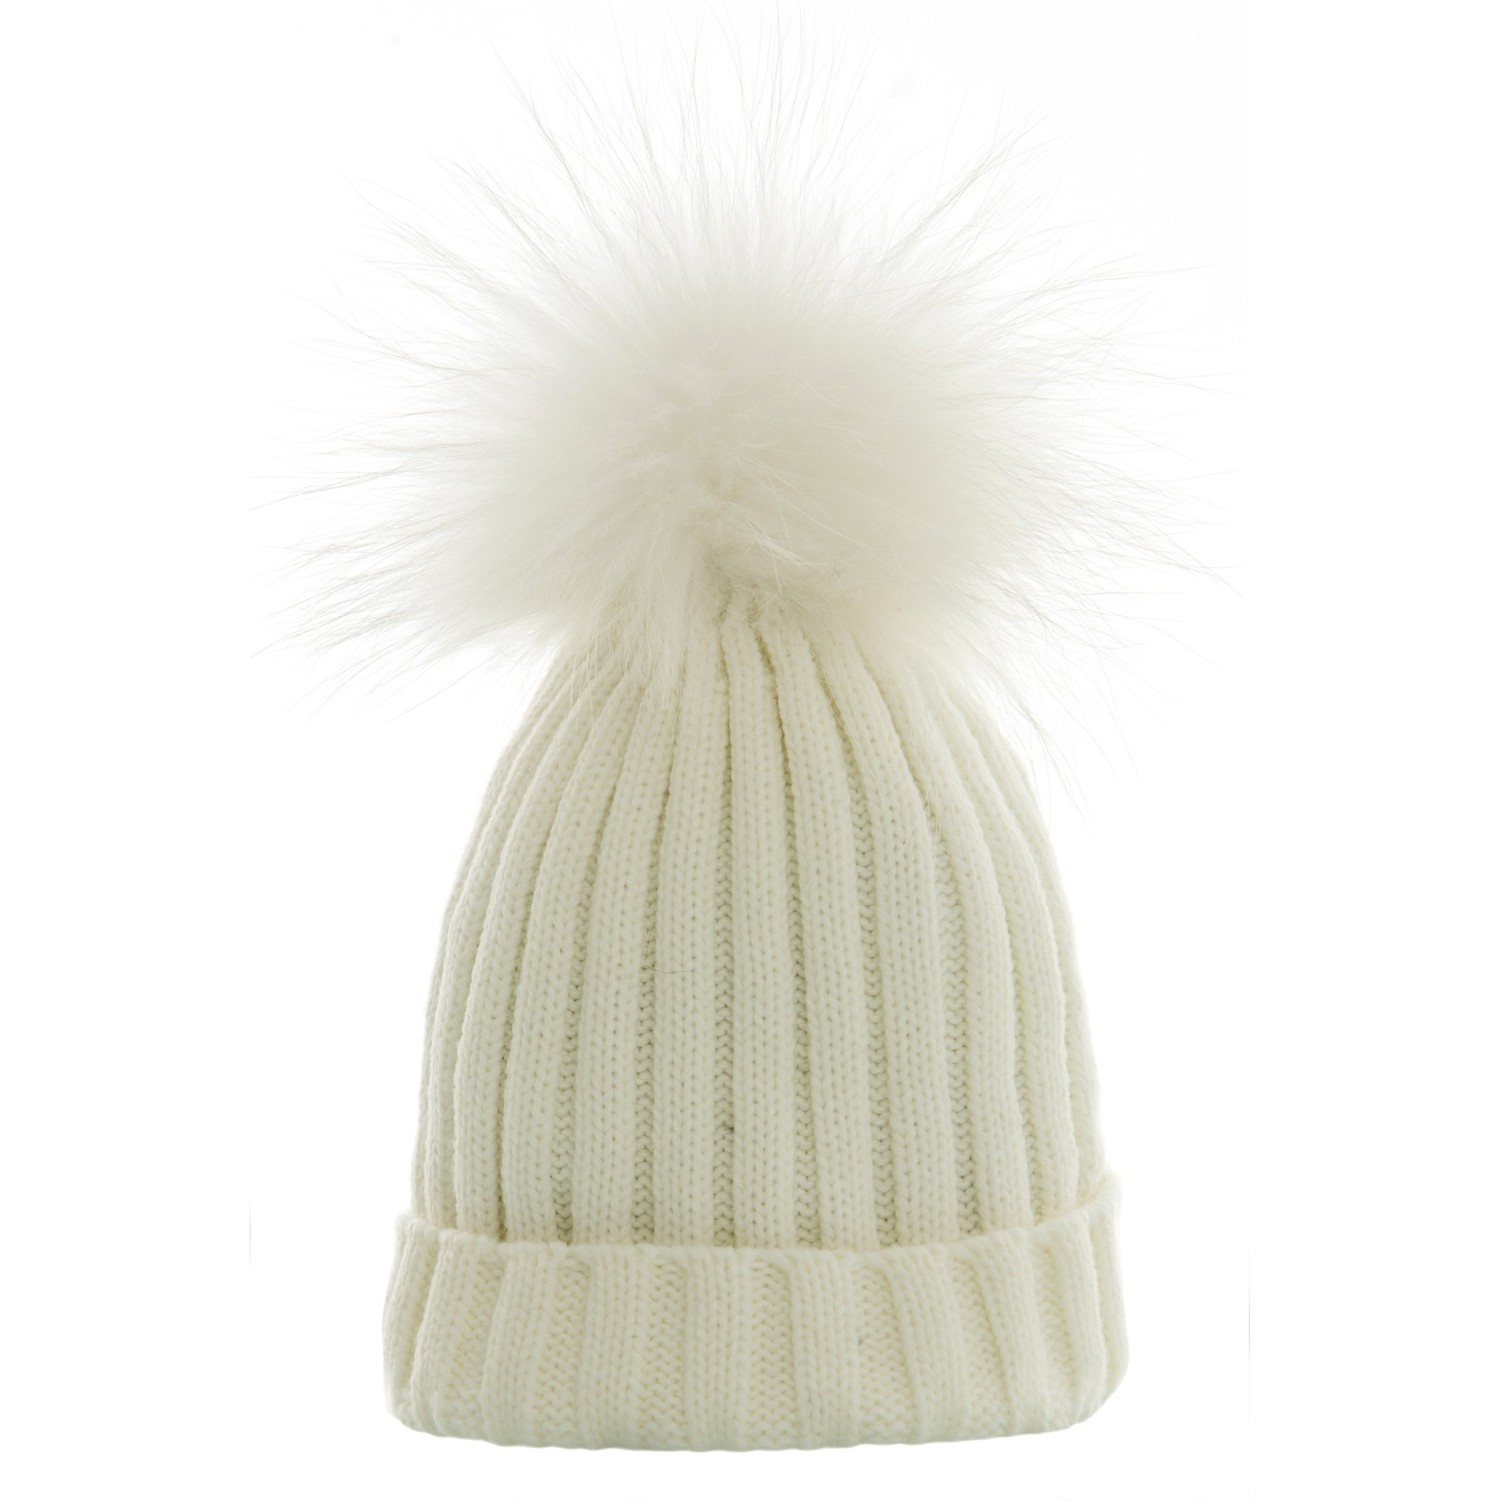 Hat with fur bobble in white, gray and black